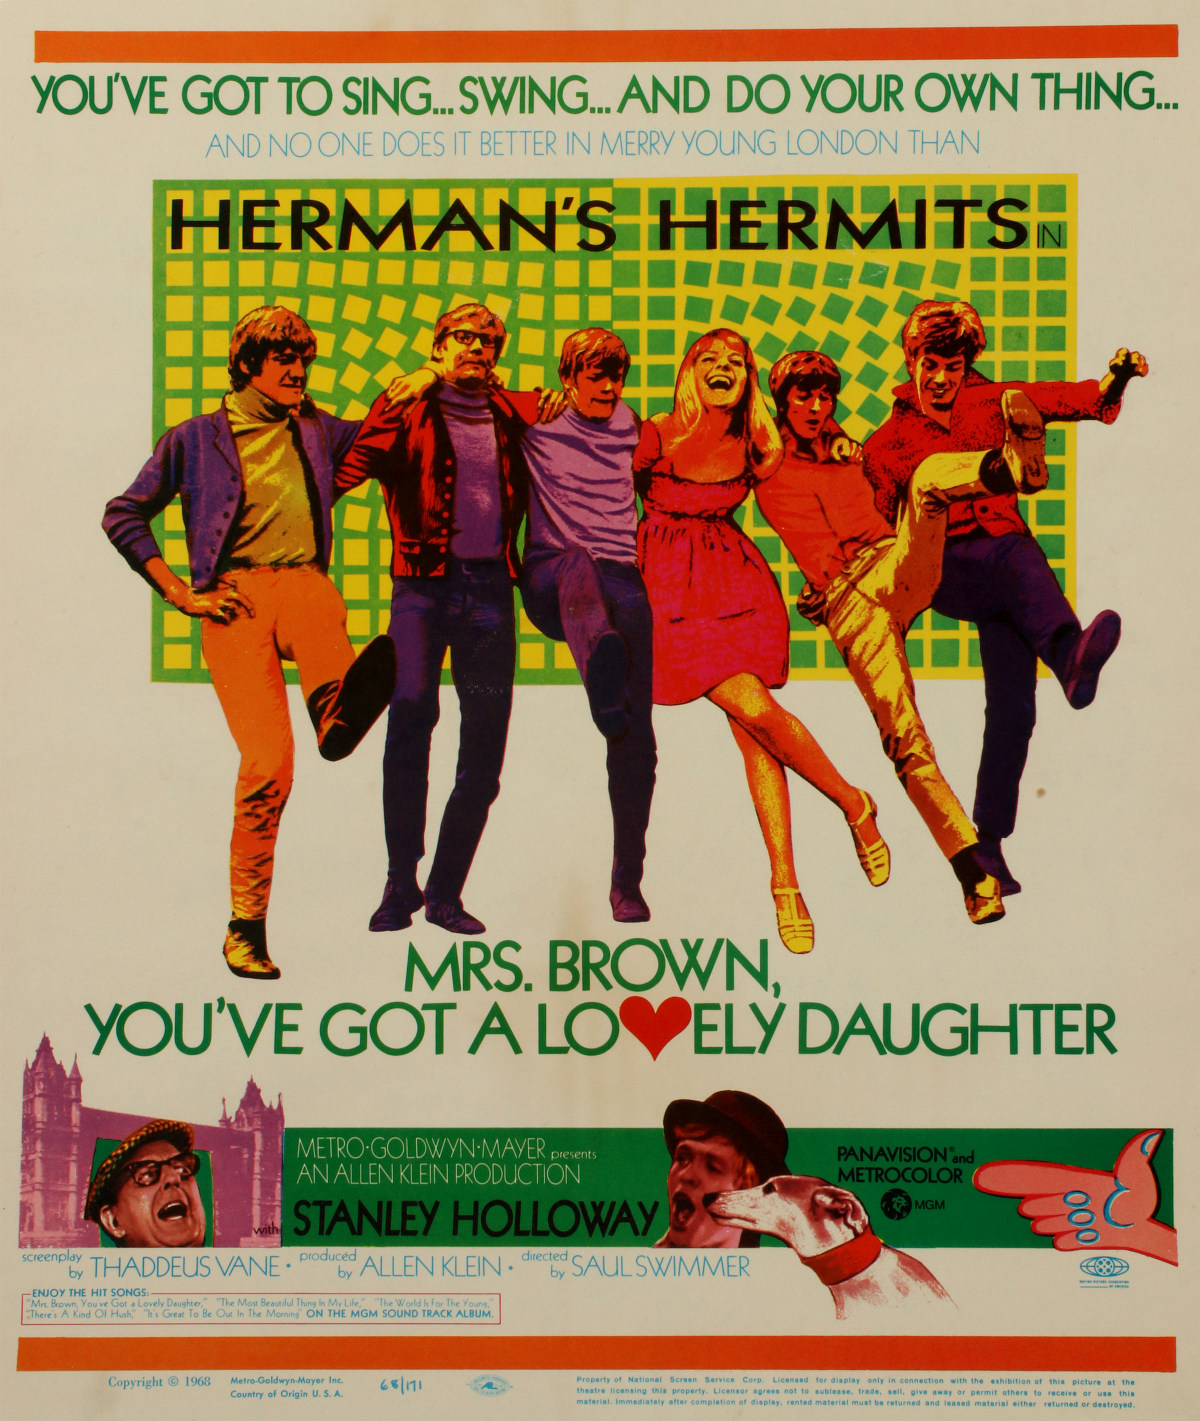 A 'MRS. BROWN YOU'VE GOT A LOVELY DAUGHTER' MOVIE POSTR